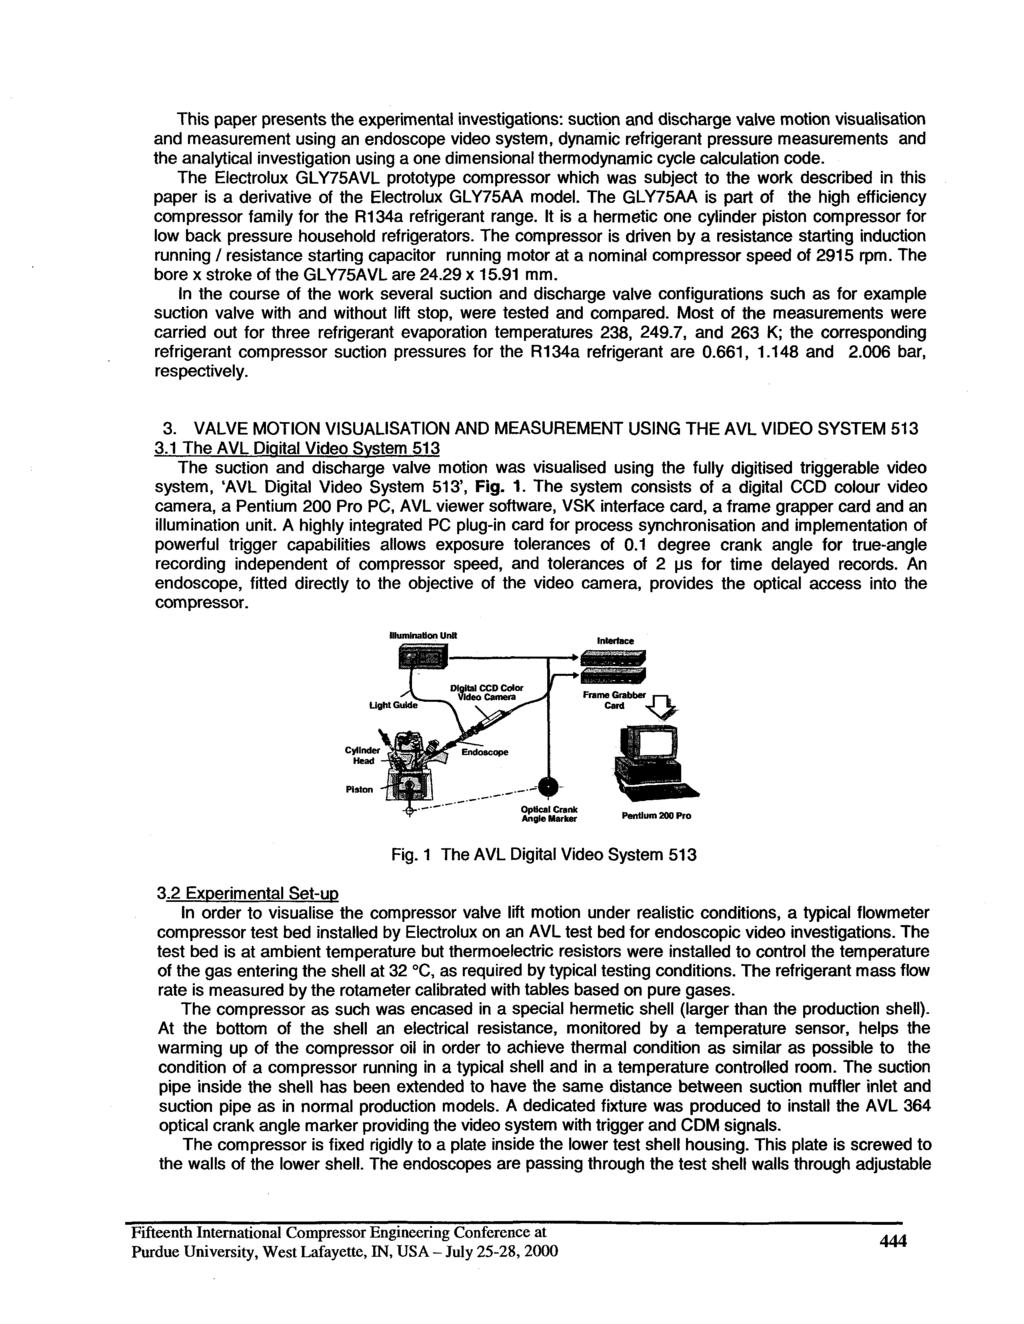 This paper presents the experimental investigations: suction and discharge valve motion visualisation and measurement using an endoscope video system, dynamic refrigerant pressure measurements and